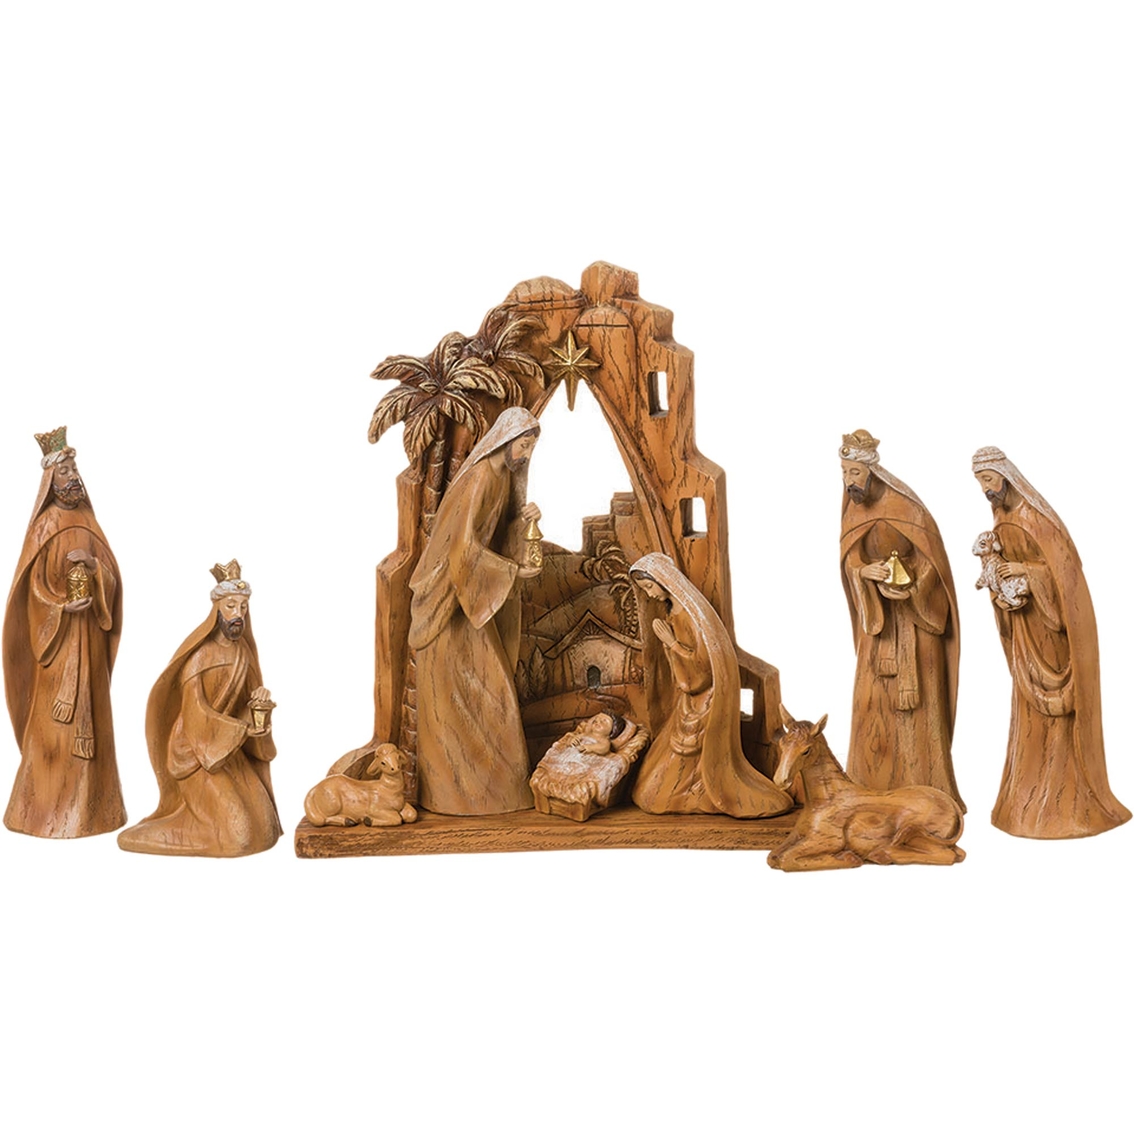 Roman 9 Pc. Set 12 in. Carved Nativity Scene with Backdrop in Faux Wood Grain